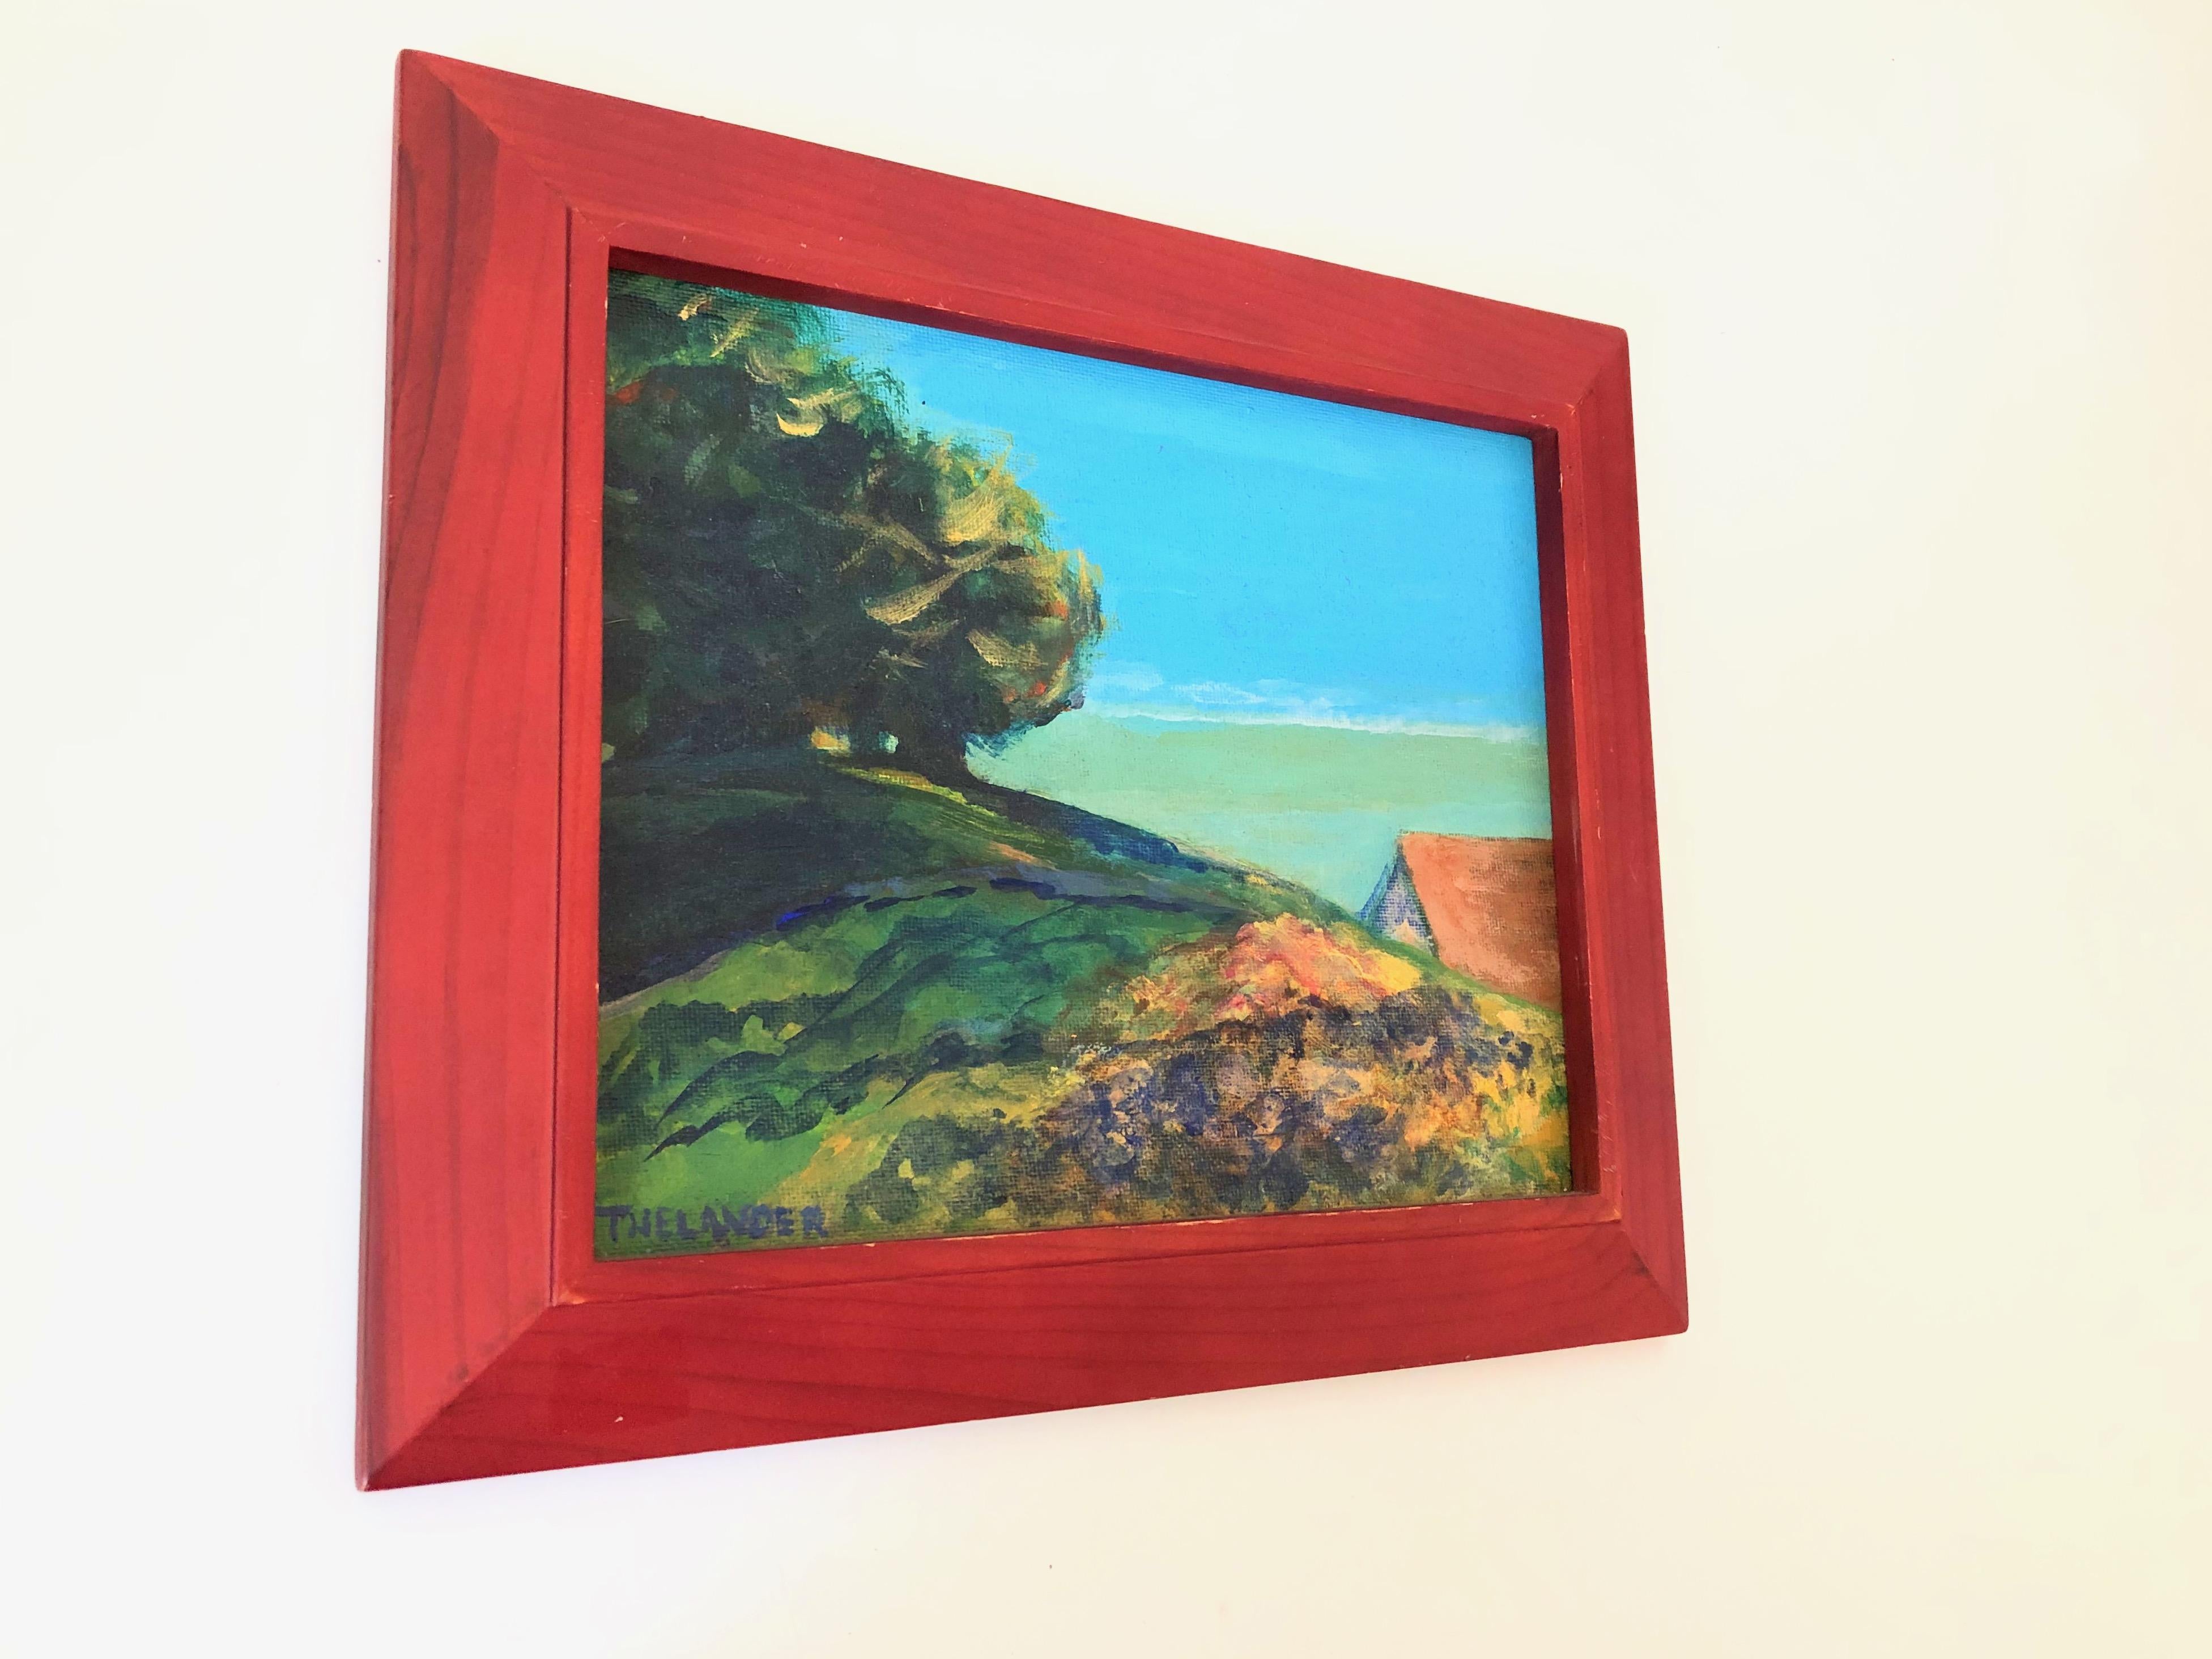 A small vintage original landscape oil painting on canvas board. Well executed in a lovely impressionist style. Mounted in a red wood frame. Titled 